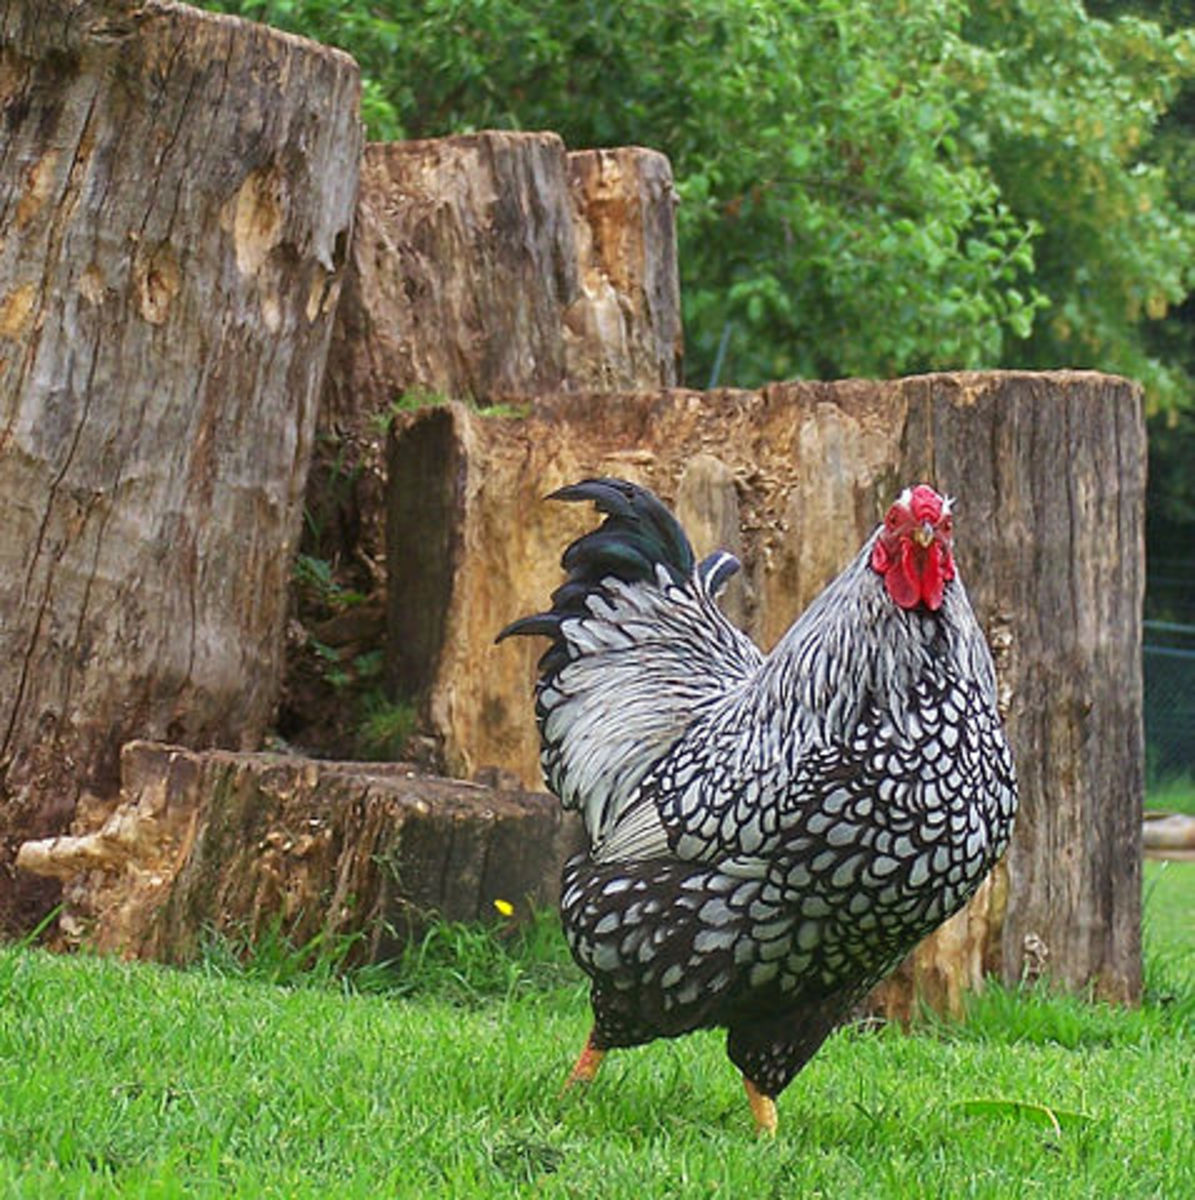 Silver-laced Wyandotte rooster